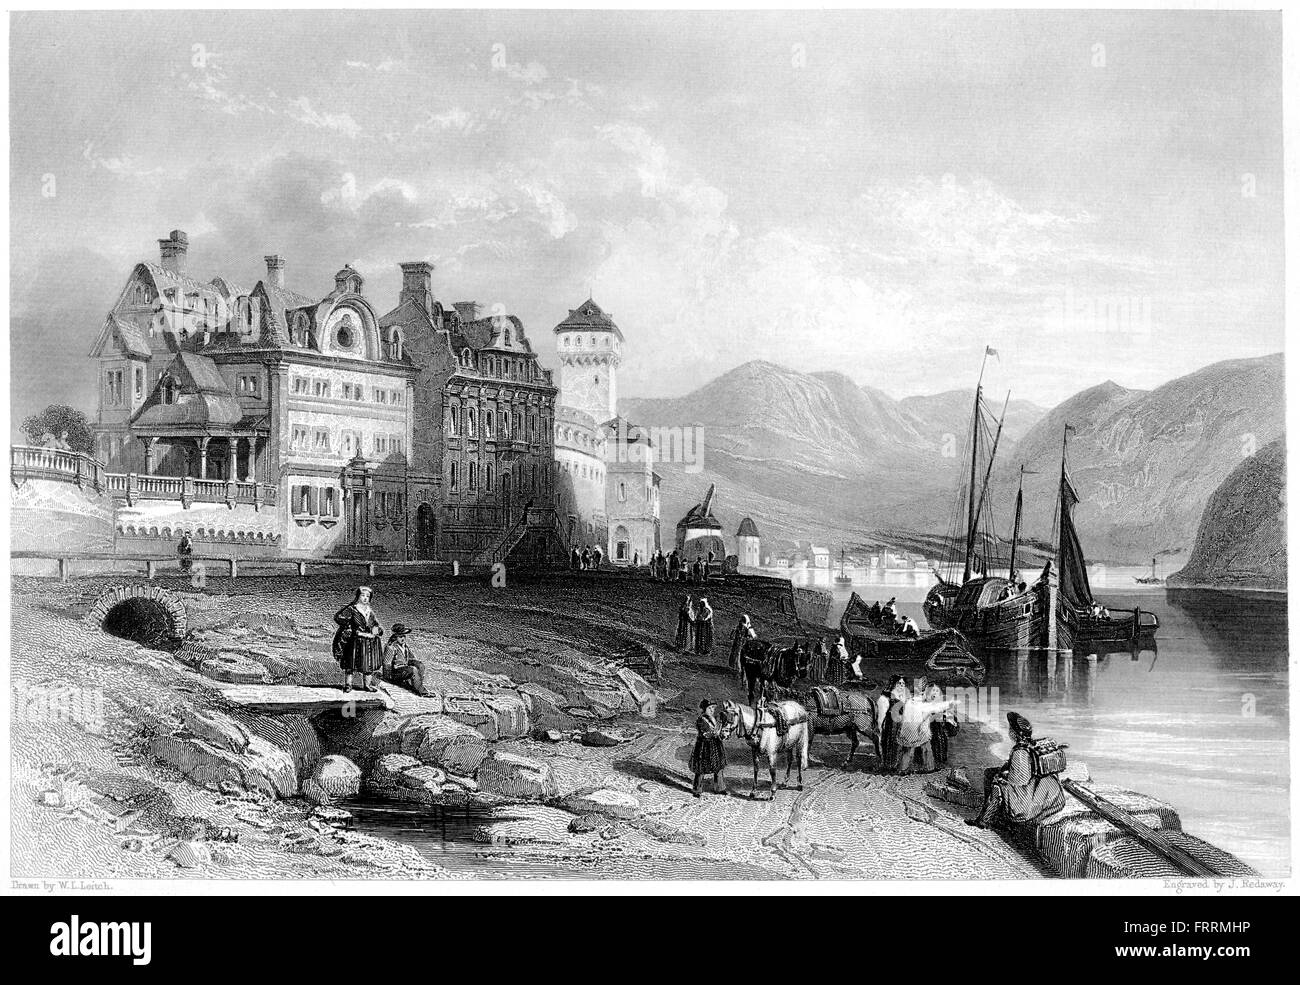 An engraving of Boppart (Boppard) on the Rhine scanned at high resolution from a book printed in 1876. Believed copyright free. Stock Photo